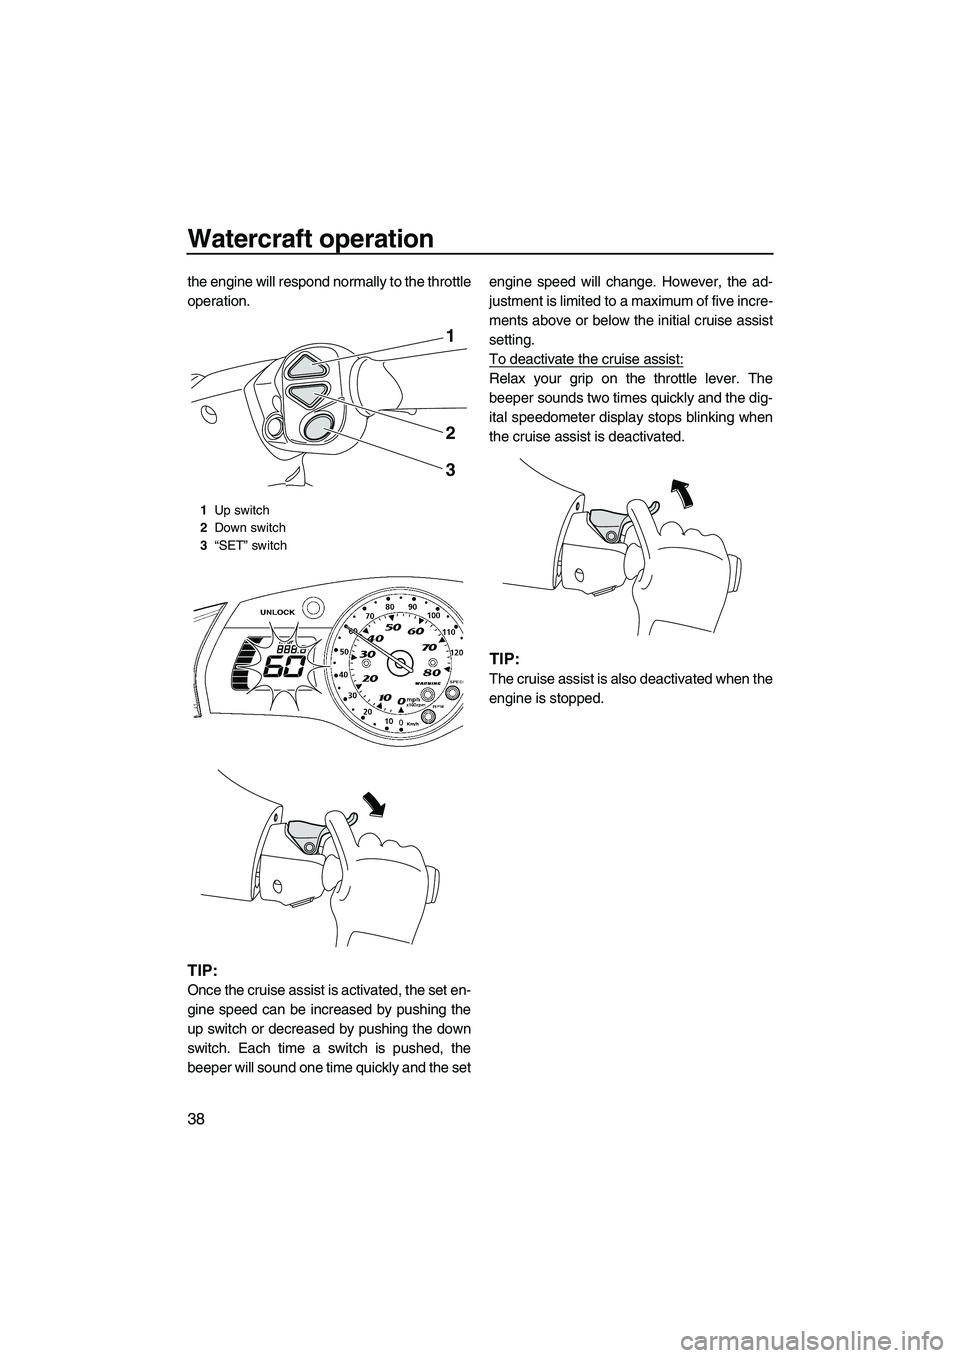 YAMAHA SVHO 2011 Service Manual Watercraft operation
38
the engine will respond normally to the throttle
operation.
TIP:
Once the cruise assist is activated, the set en-
gine speed can be increased by pushing the
up switch or decrea